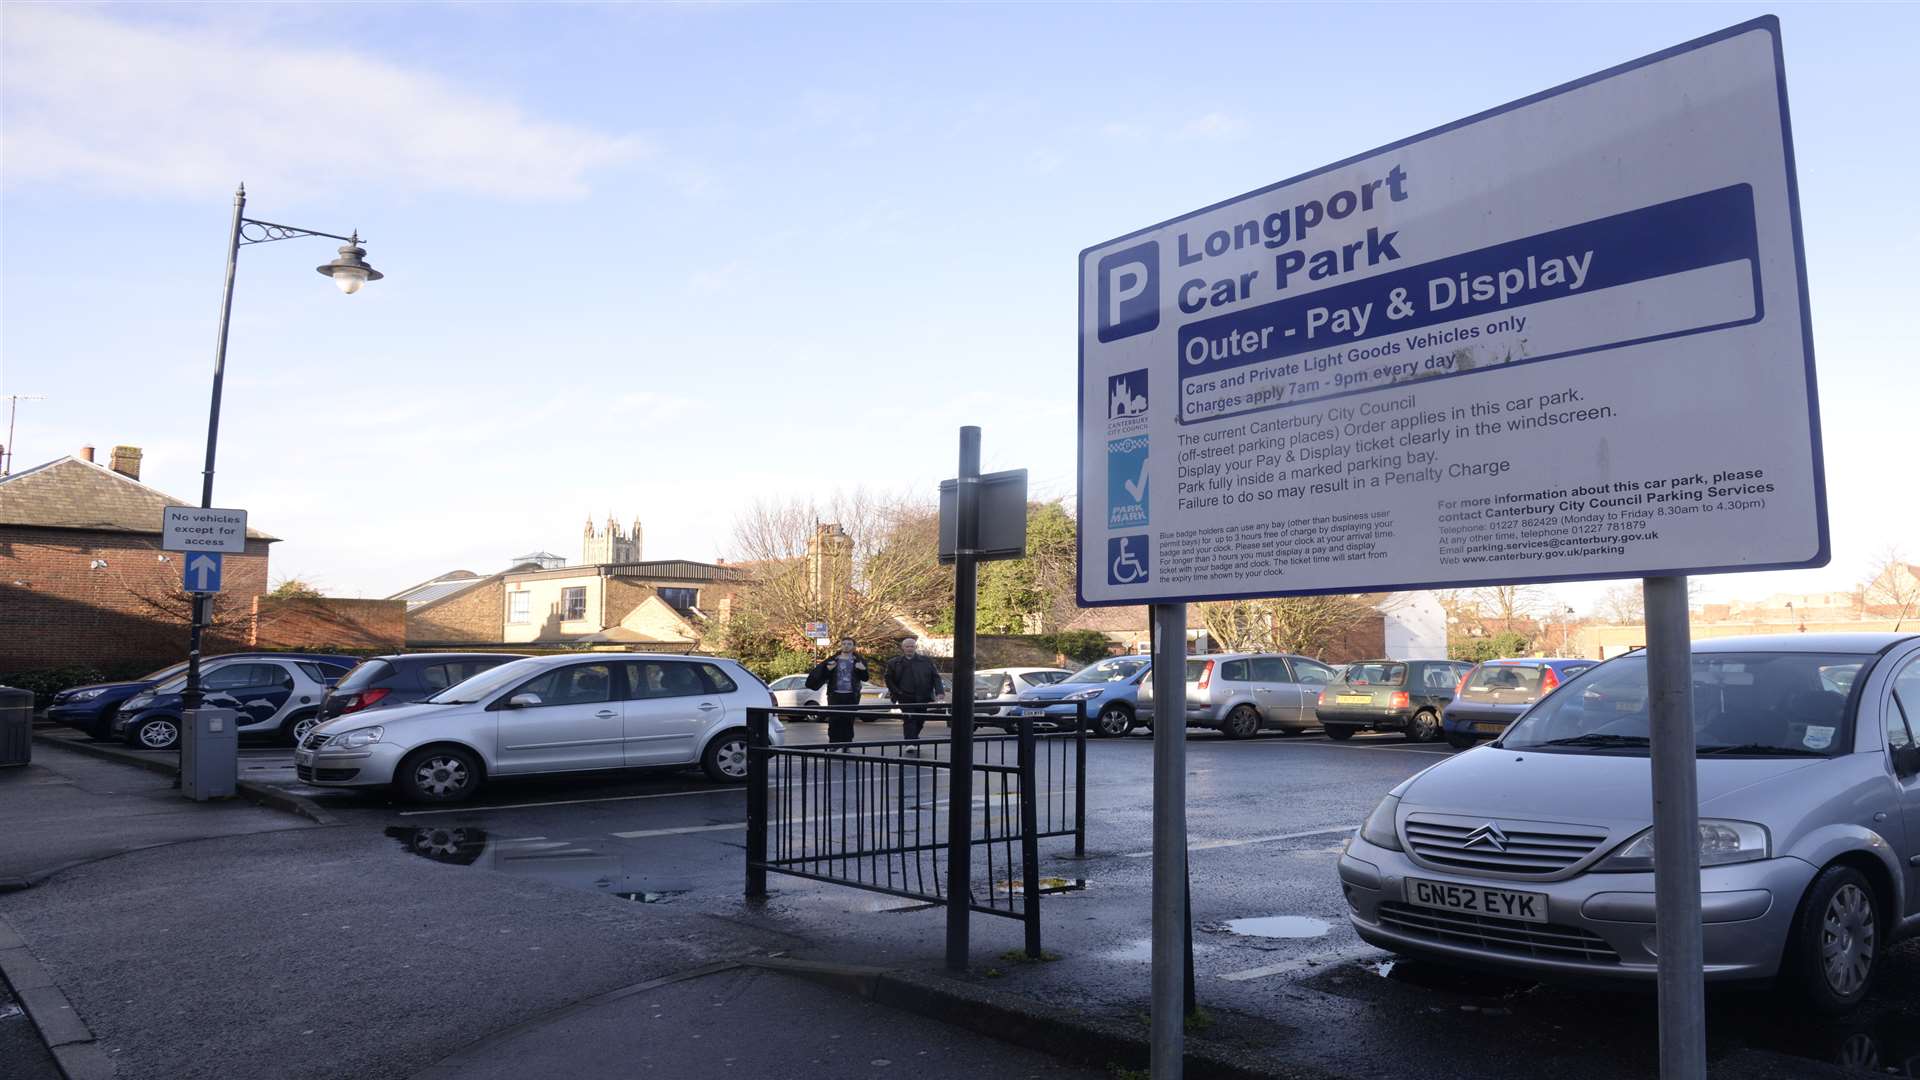 Longport car park in Canterbury is earmarked for partial closure